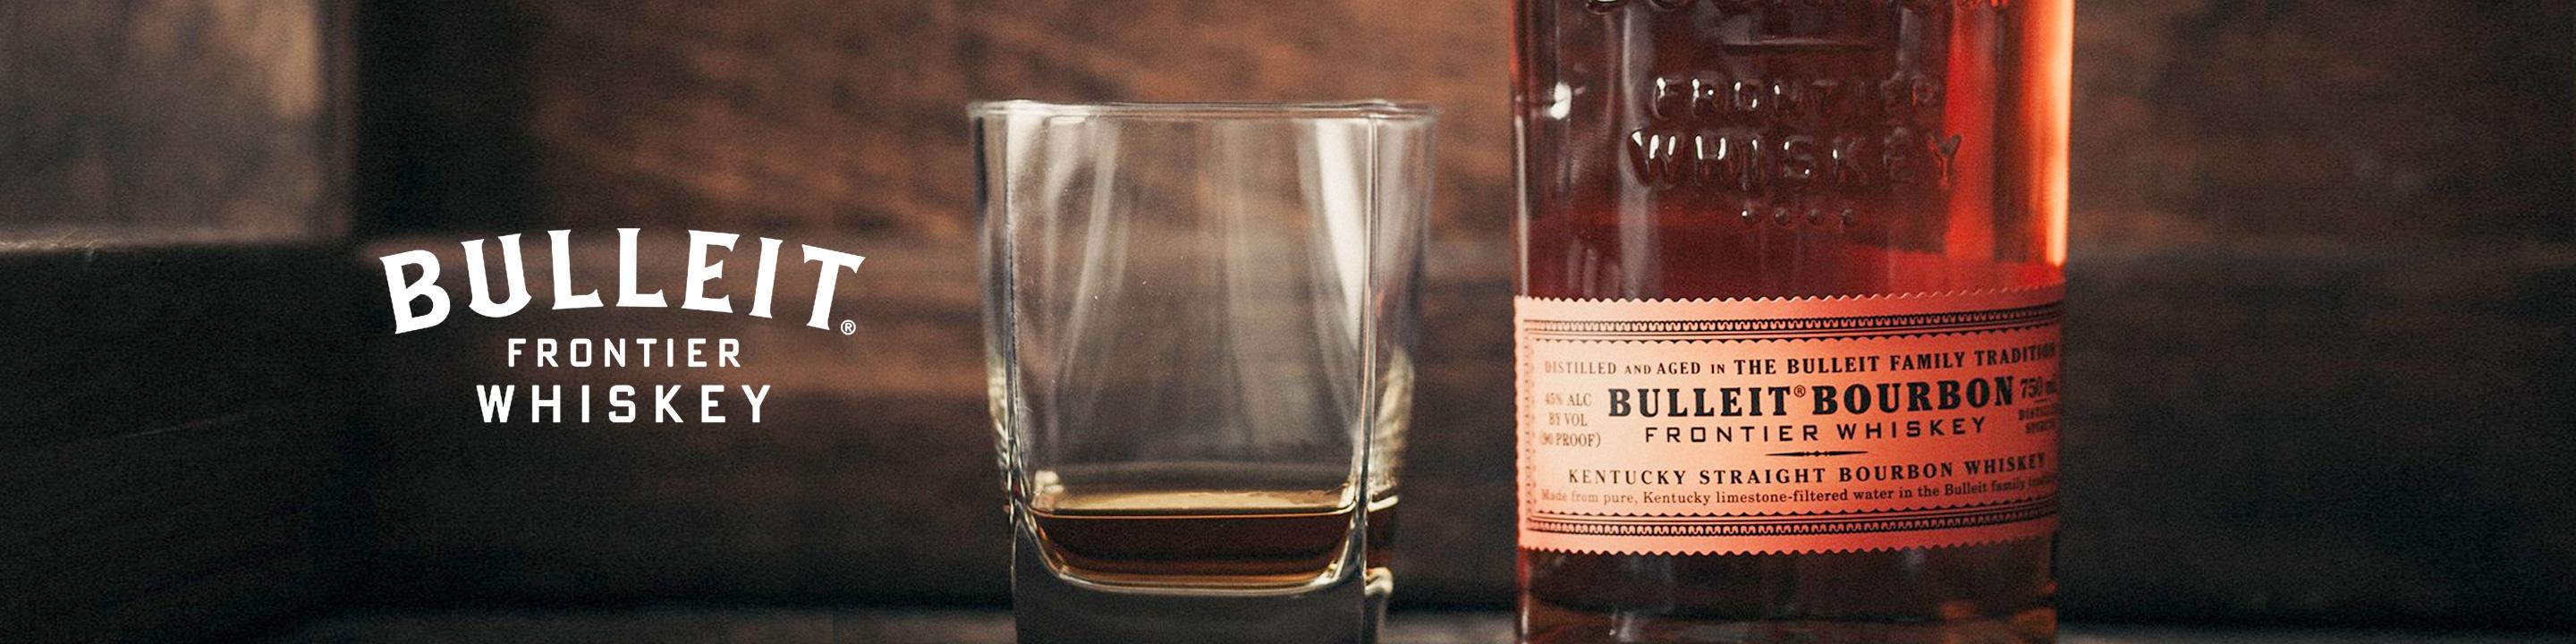 To this day, Bulleit™ Bourbon is distilled and aged in the Bulleit family tradition. High rye content gives it a bold, spicy character with a distinctively smooth, clean finish. Our aging philosophy is simple: we wait until our bourbon is ready.  Buy Bulleit online now from your nearby liquor store via Minibar Delivery.